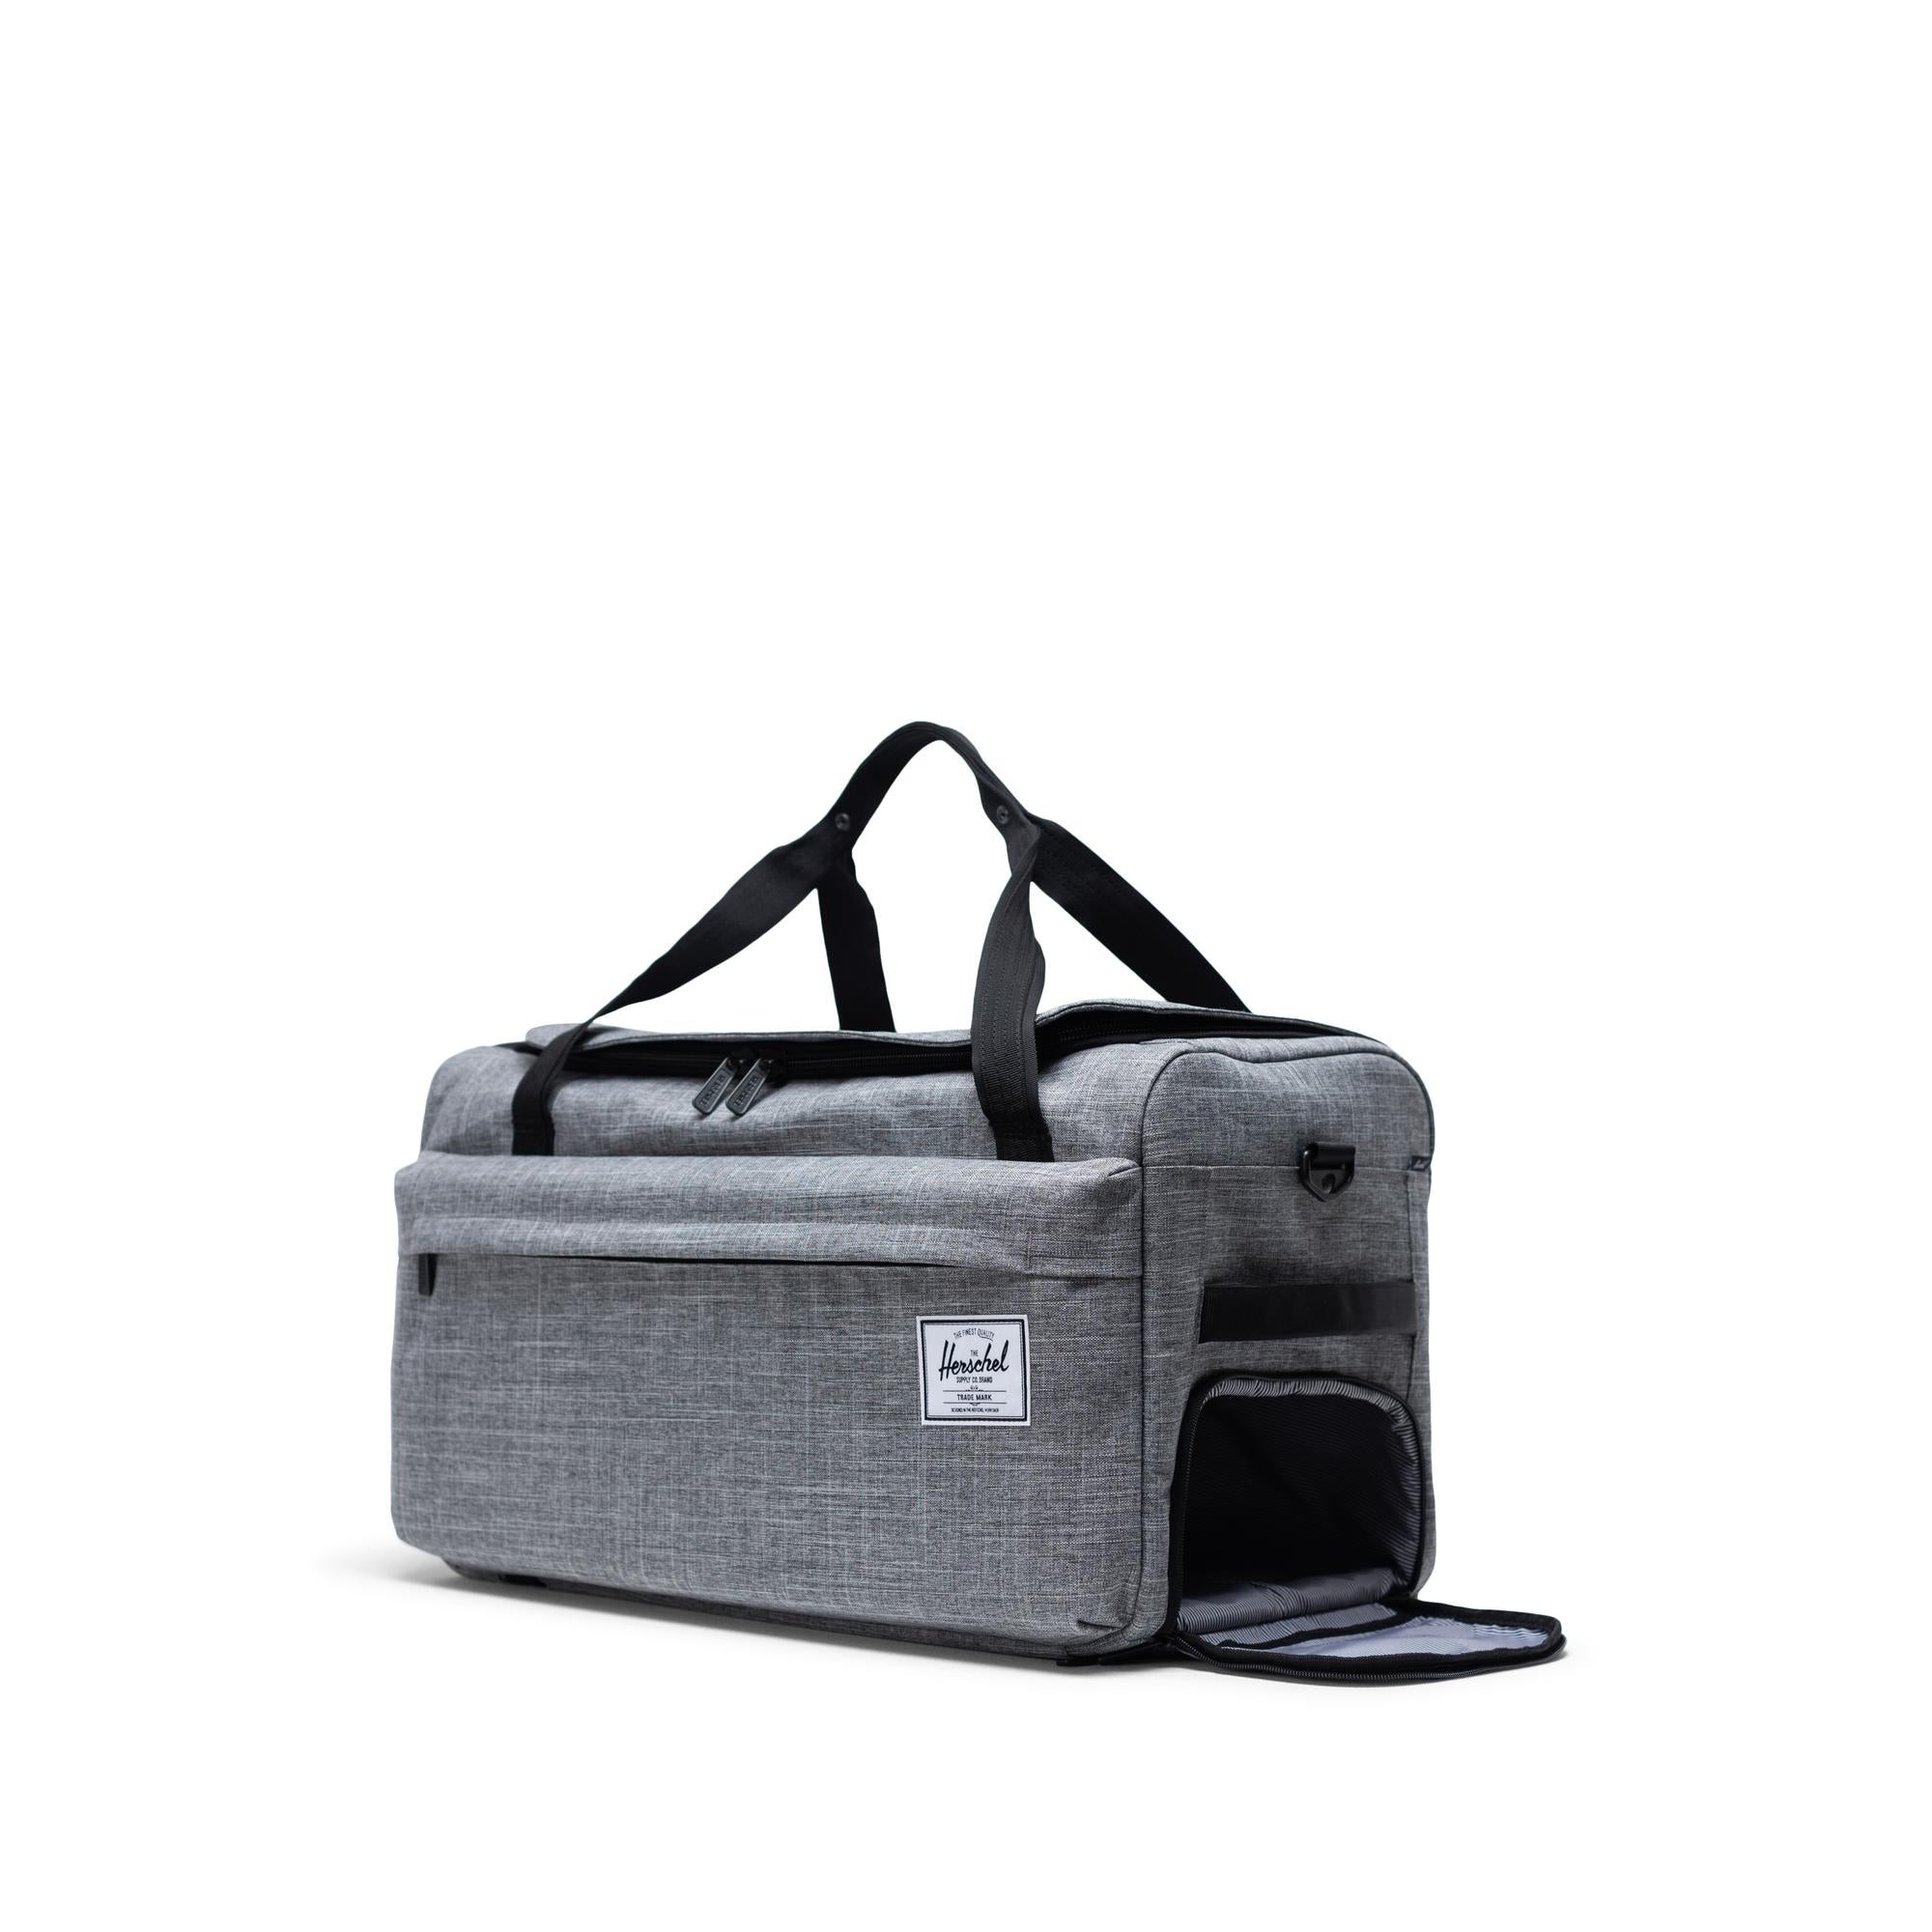 Outfitter Luggage 50L